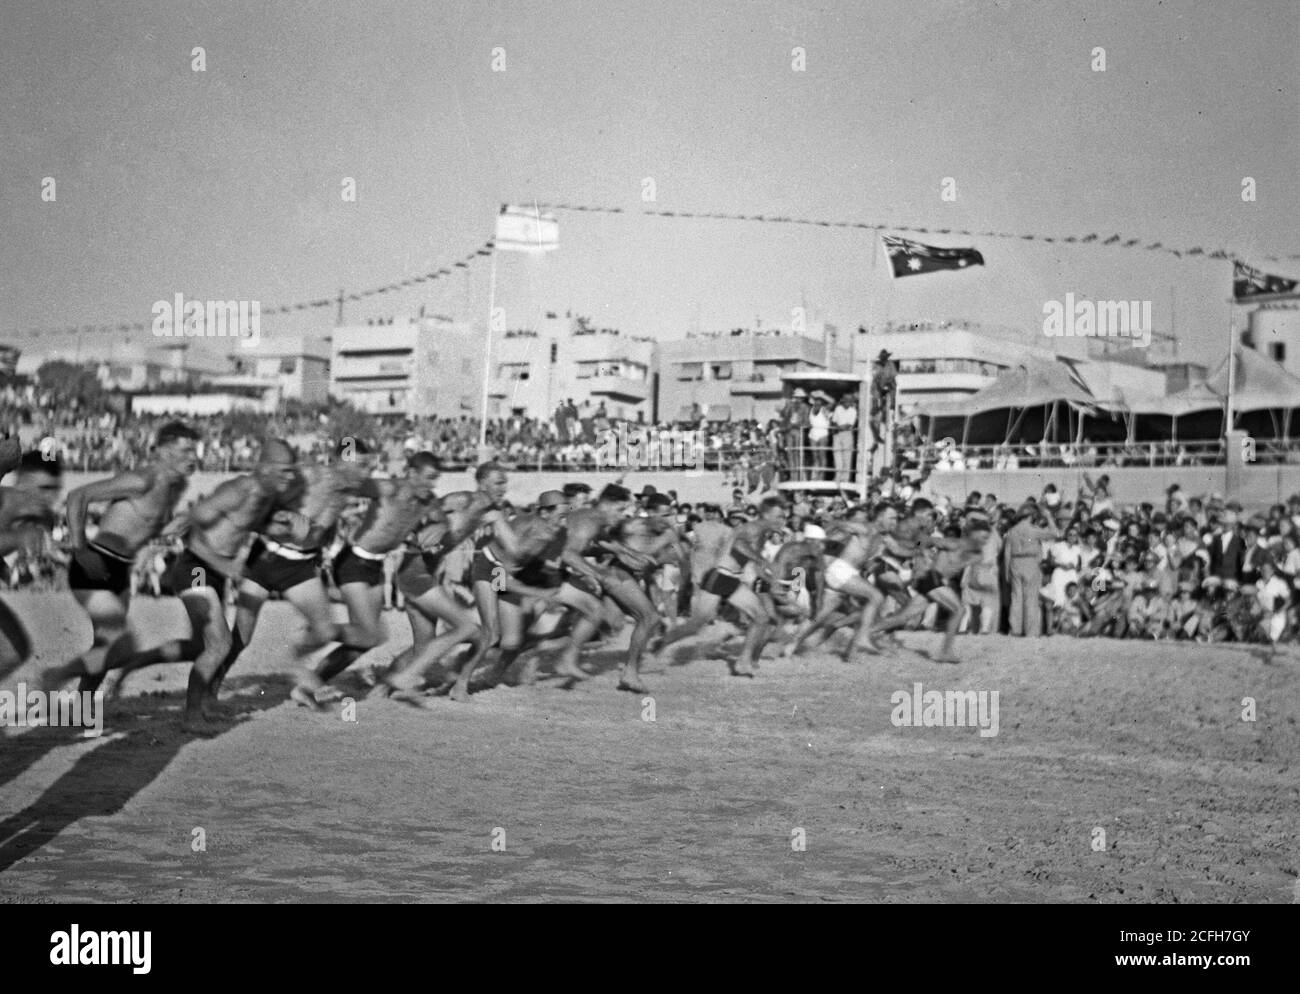 Middle East History - The A.I.F. [i.e. Australian Imperial Force] Surf Carnival display at Tel-Aviv Stock Photo